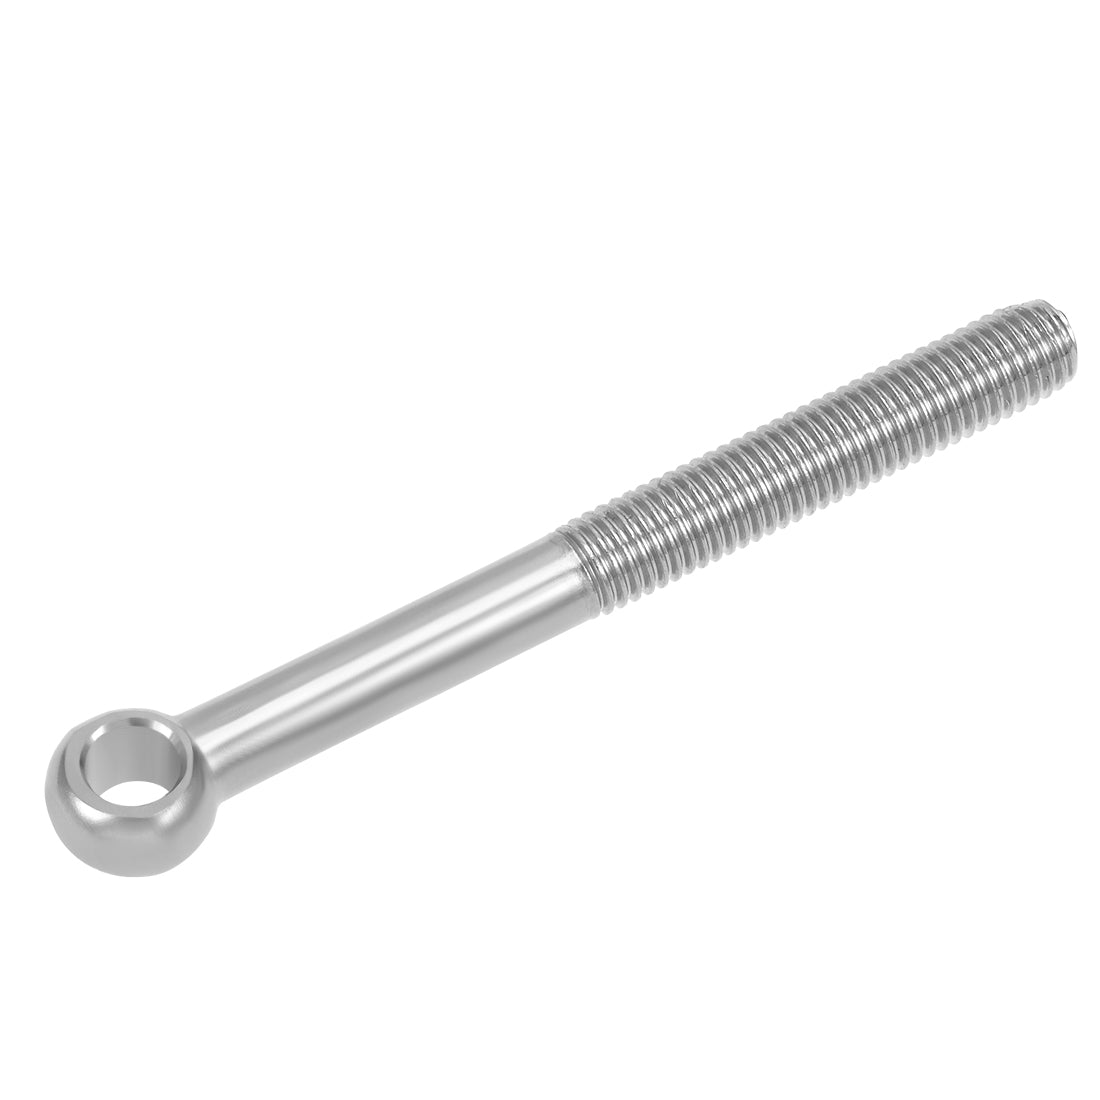 uxcell Uxcell M12 x 120mm Machinery Shoulder Swing Lifting Eye Bolt 304 Stainless Steel Metric Thread